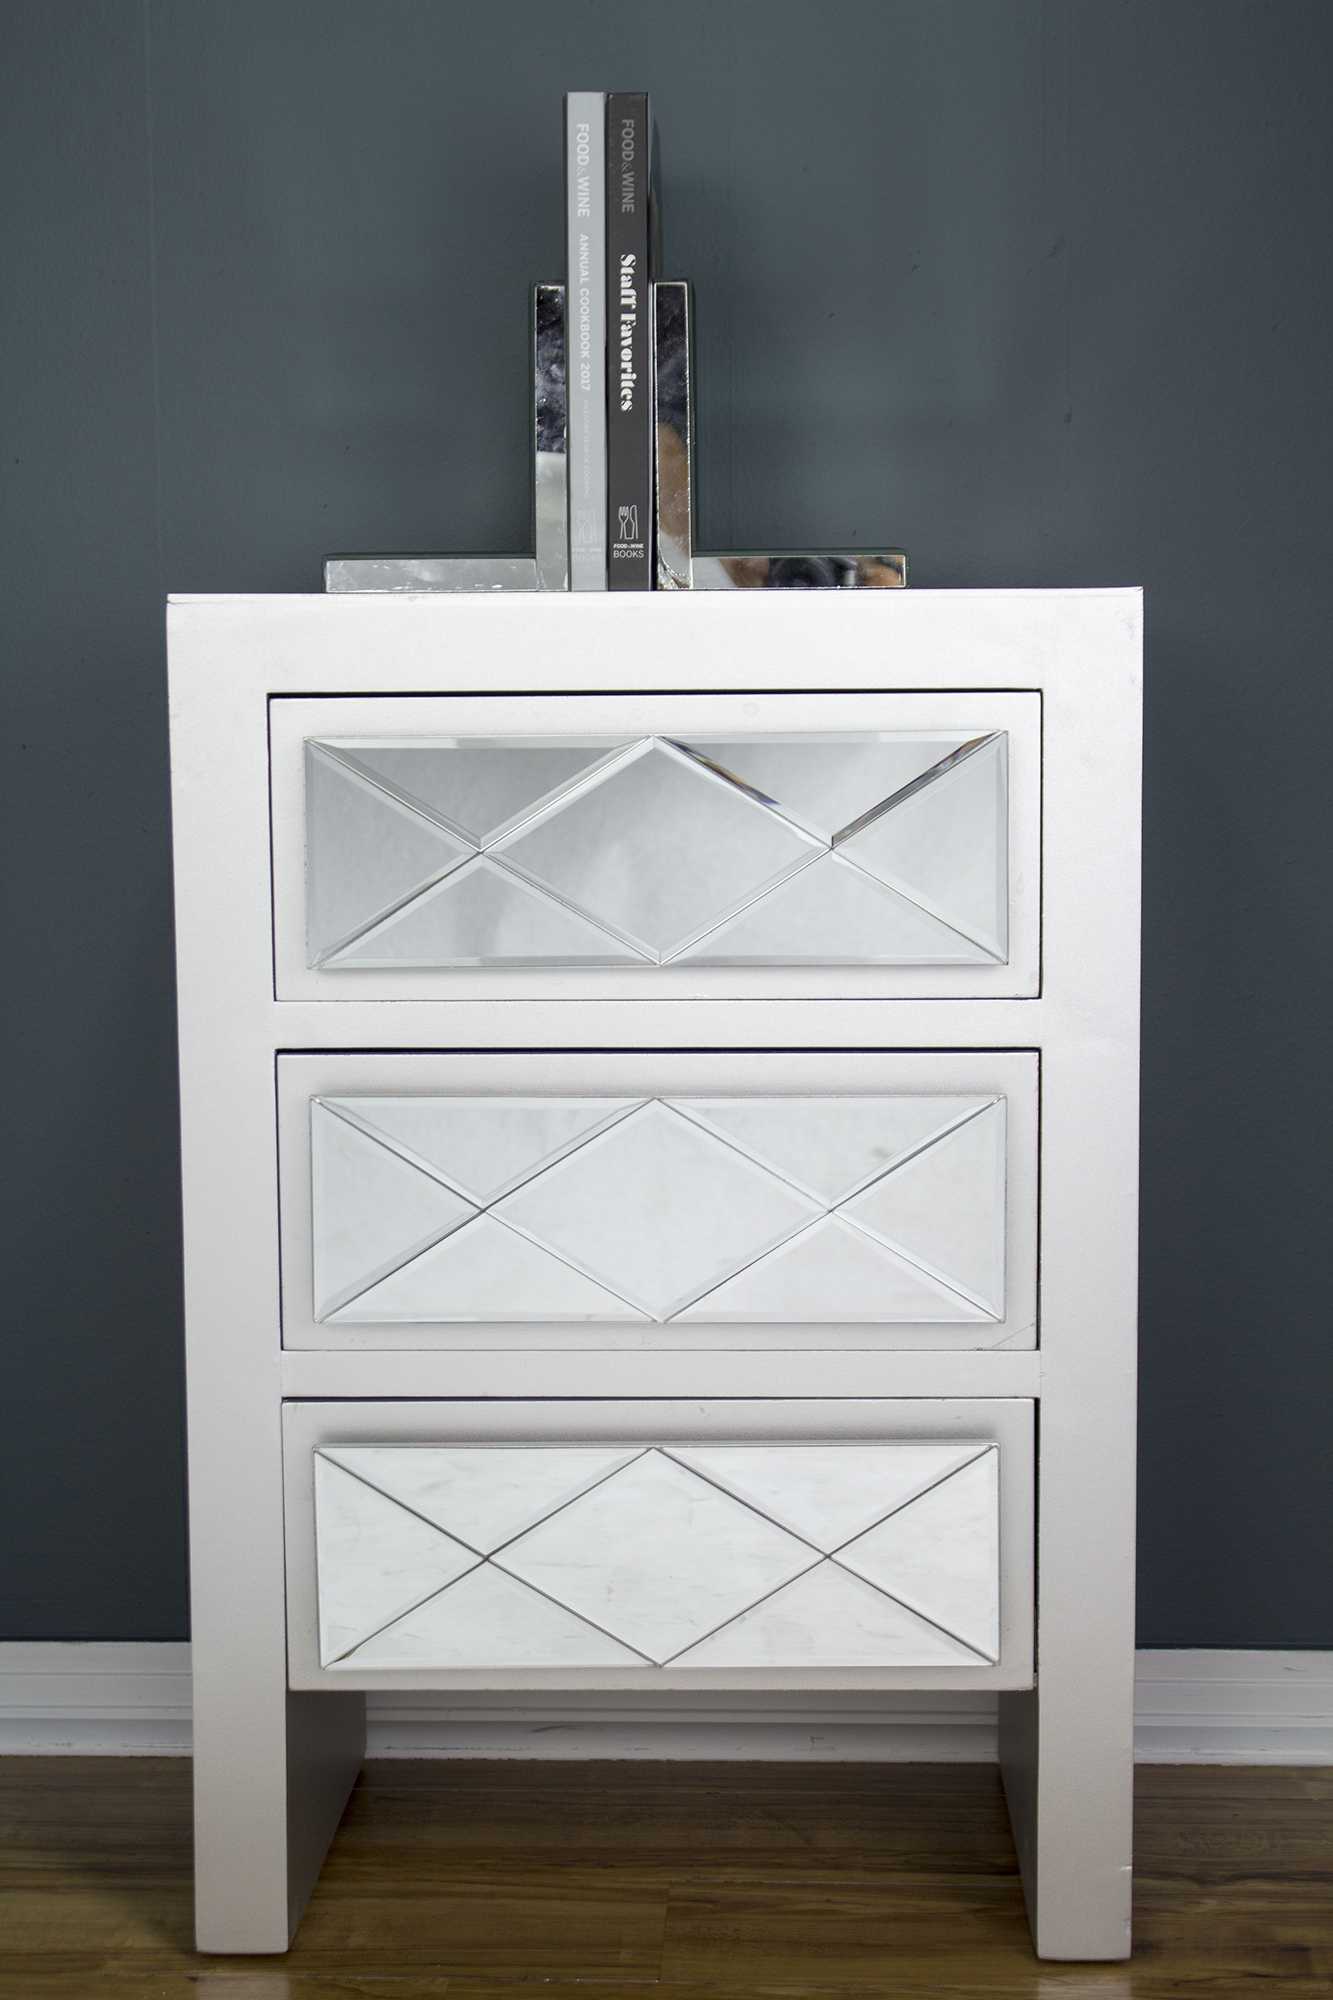 19.6" X 13.8" X 29" Silver MDF Wood Mirrored Glass Accent Cabinet with a Door and Mirrored Glass